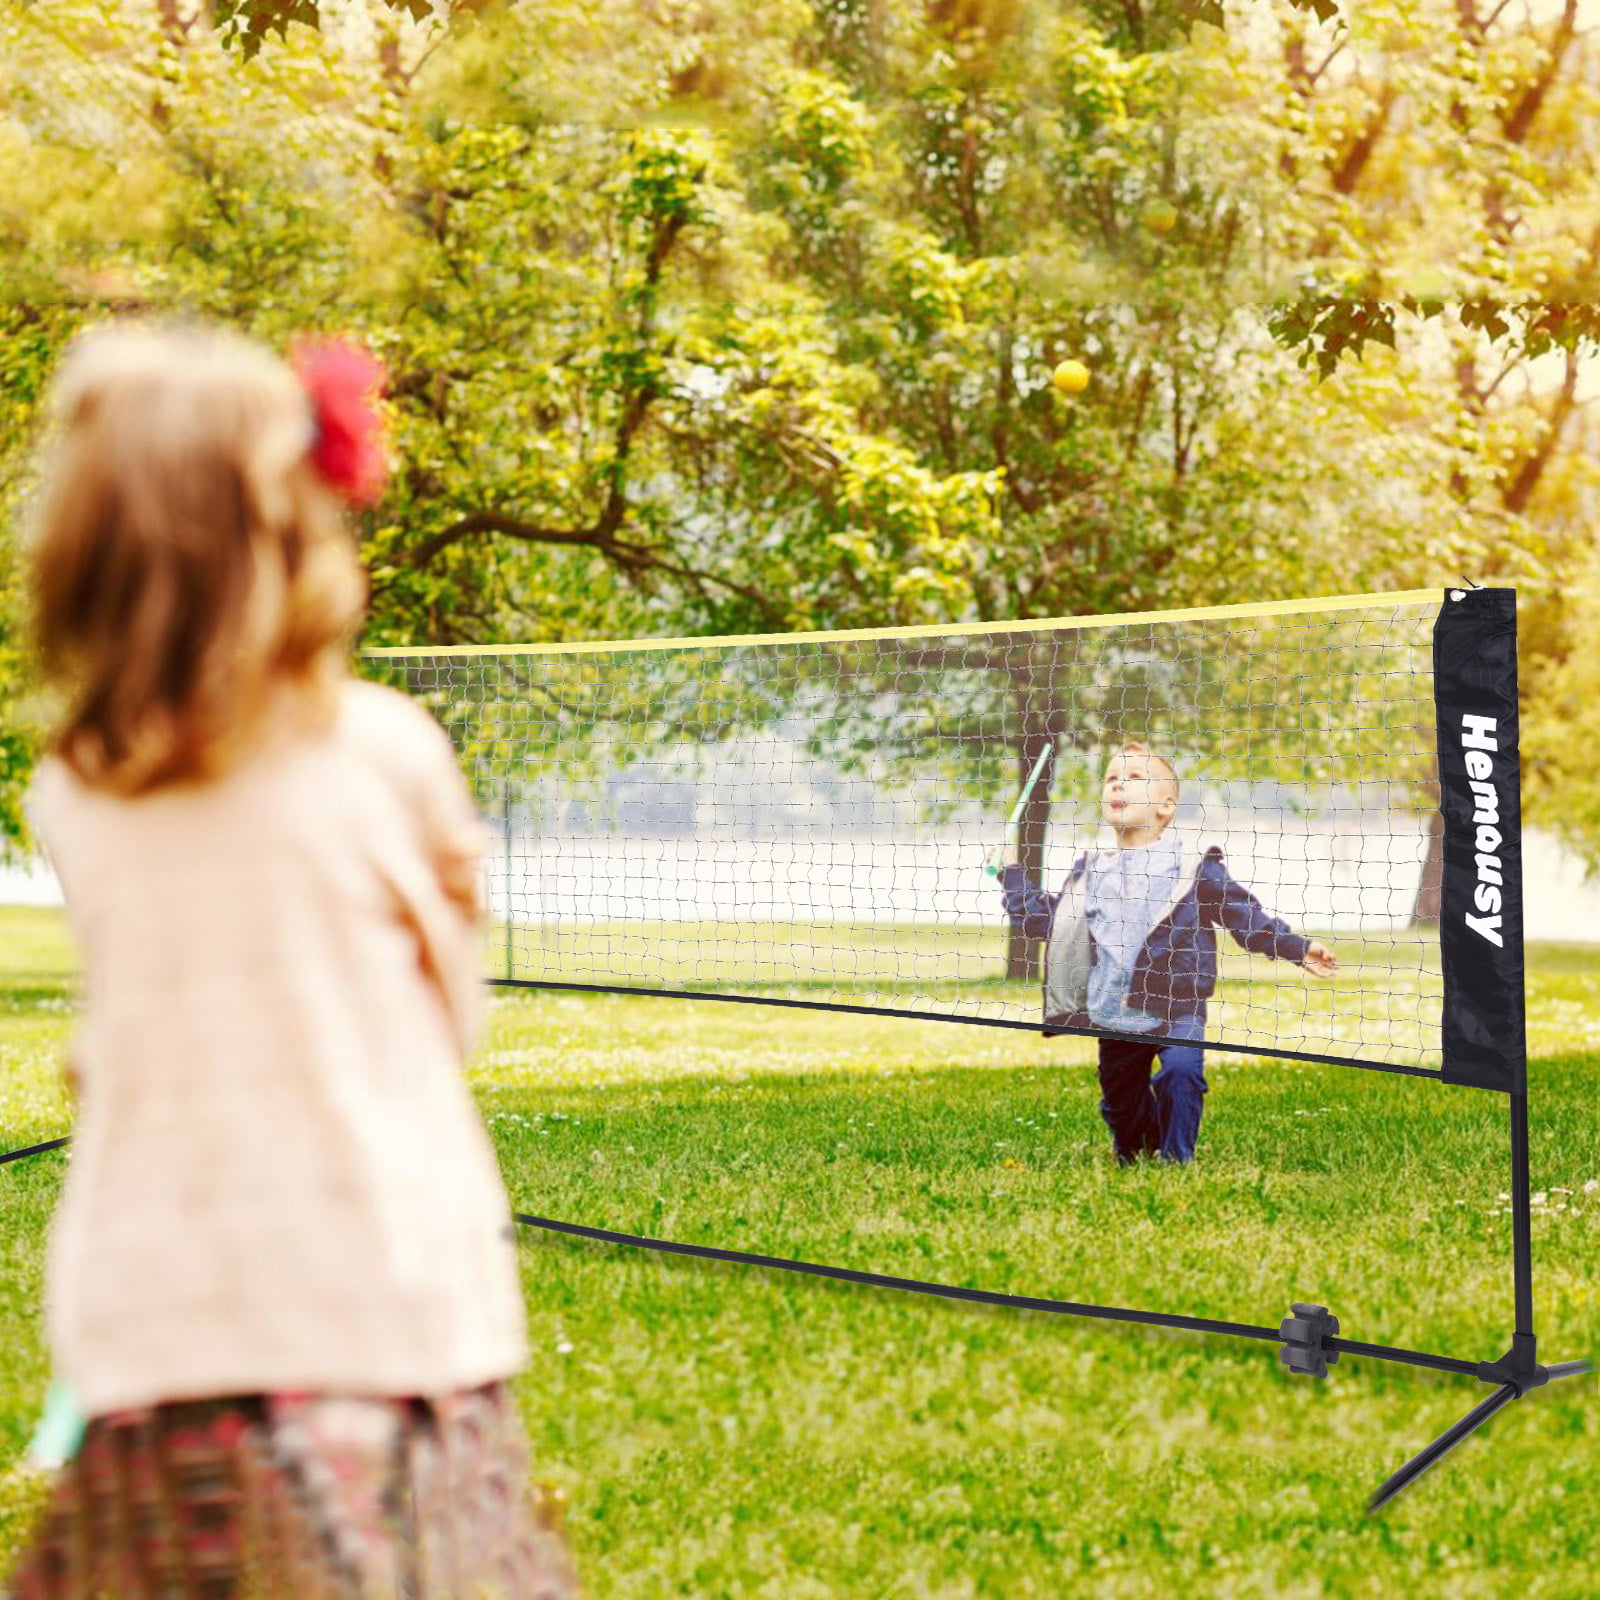 Details about   14FT Portable Badminton Net Set for Kids Volleyball Tennis Soccer Pickleball 